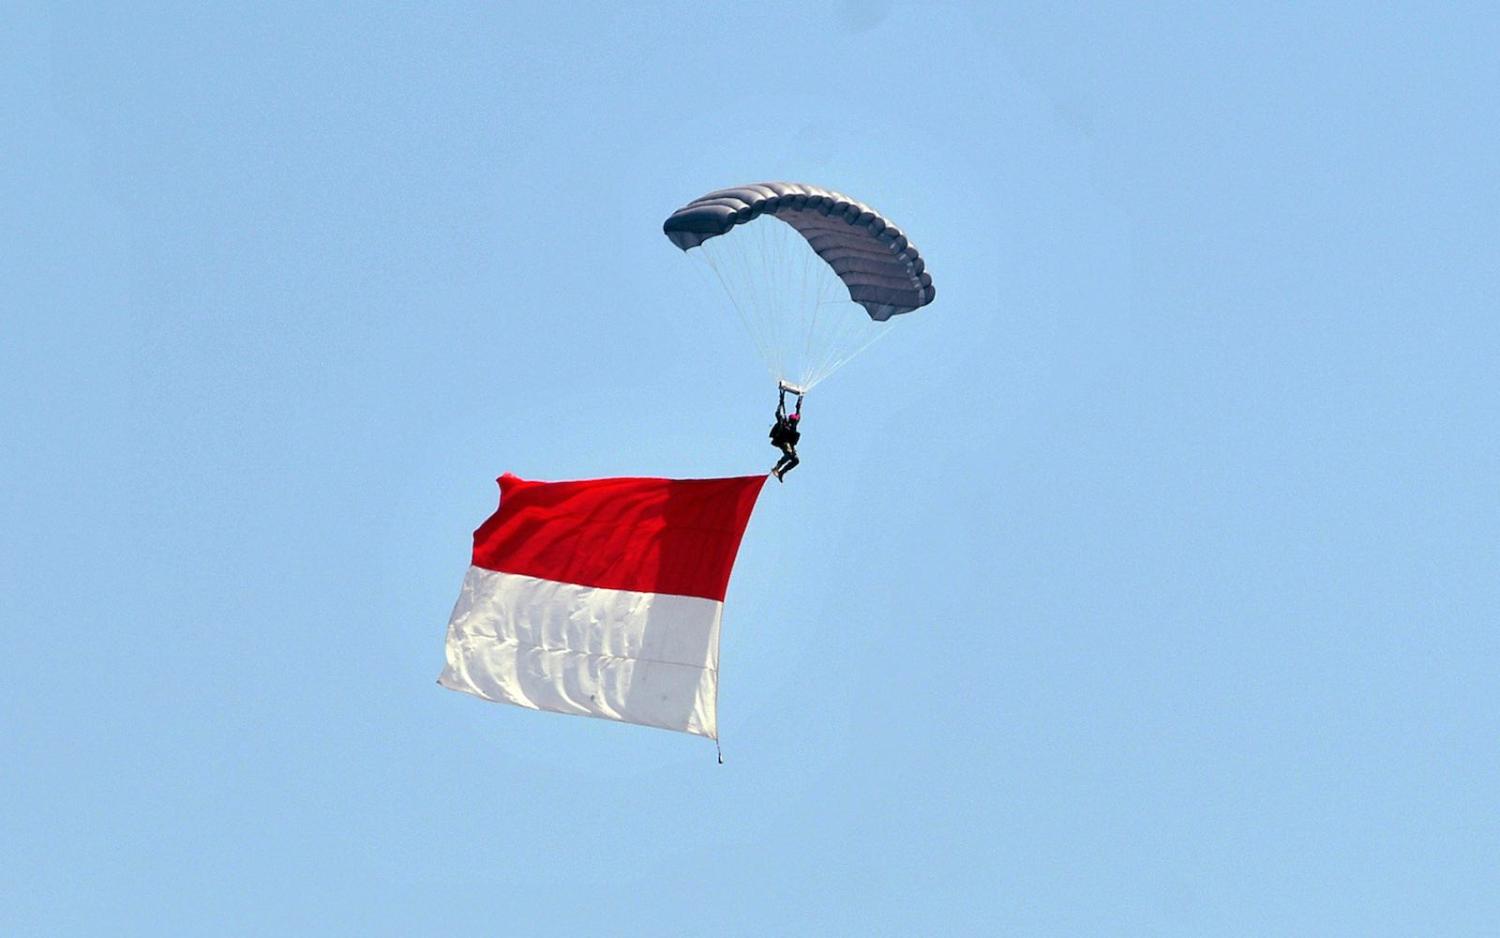 TNI Air Force demonstration at the 74th anniversary celebration of the Indonesian National Armed Forces, Jakarta, 5 October 2019 (Dasril Roszandi/NurPhoto via Getty Images)